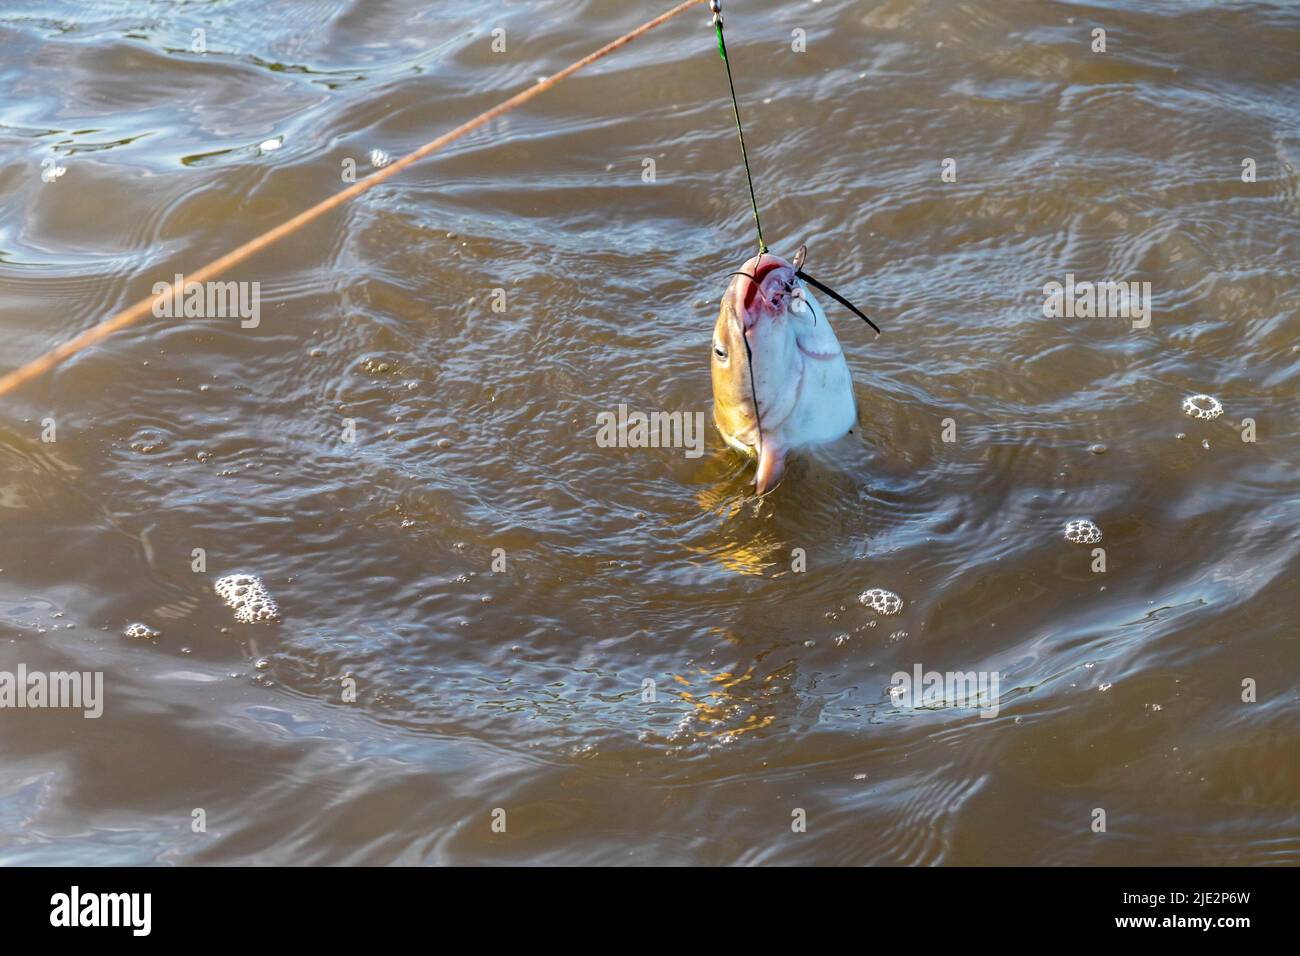 https://c8.alamy.com/comp/2JE2P6W/peoria-illinois-a-catfish-hooked-on-a-trotline-in-the-illinois-river-a-trotline-is-a-long-line-from-which-a-hundred-or-more-baited-hooks-are-hung-2JE2P6W.jpg